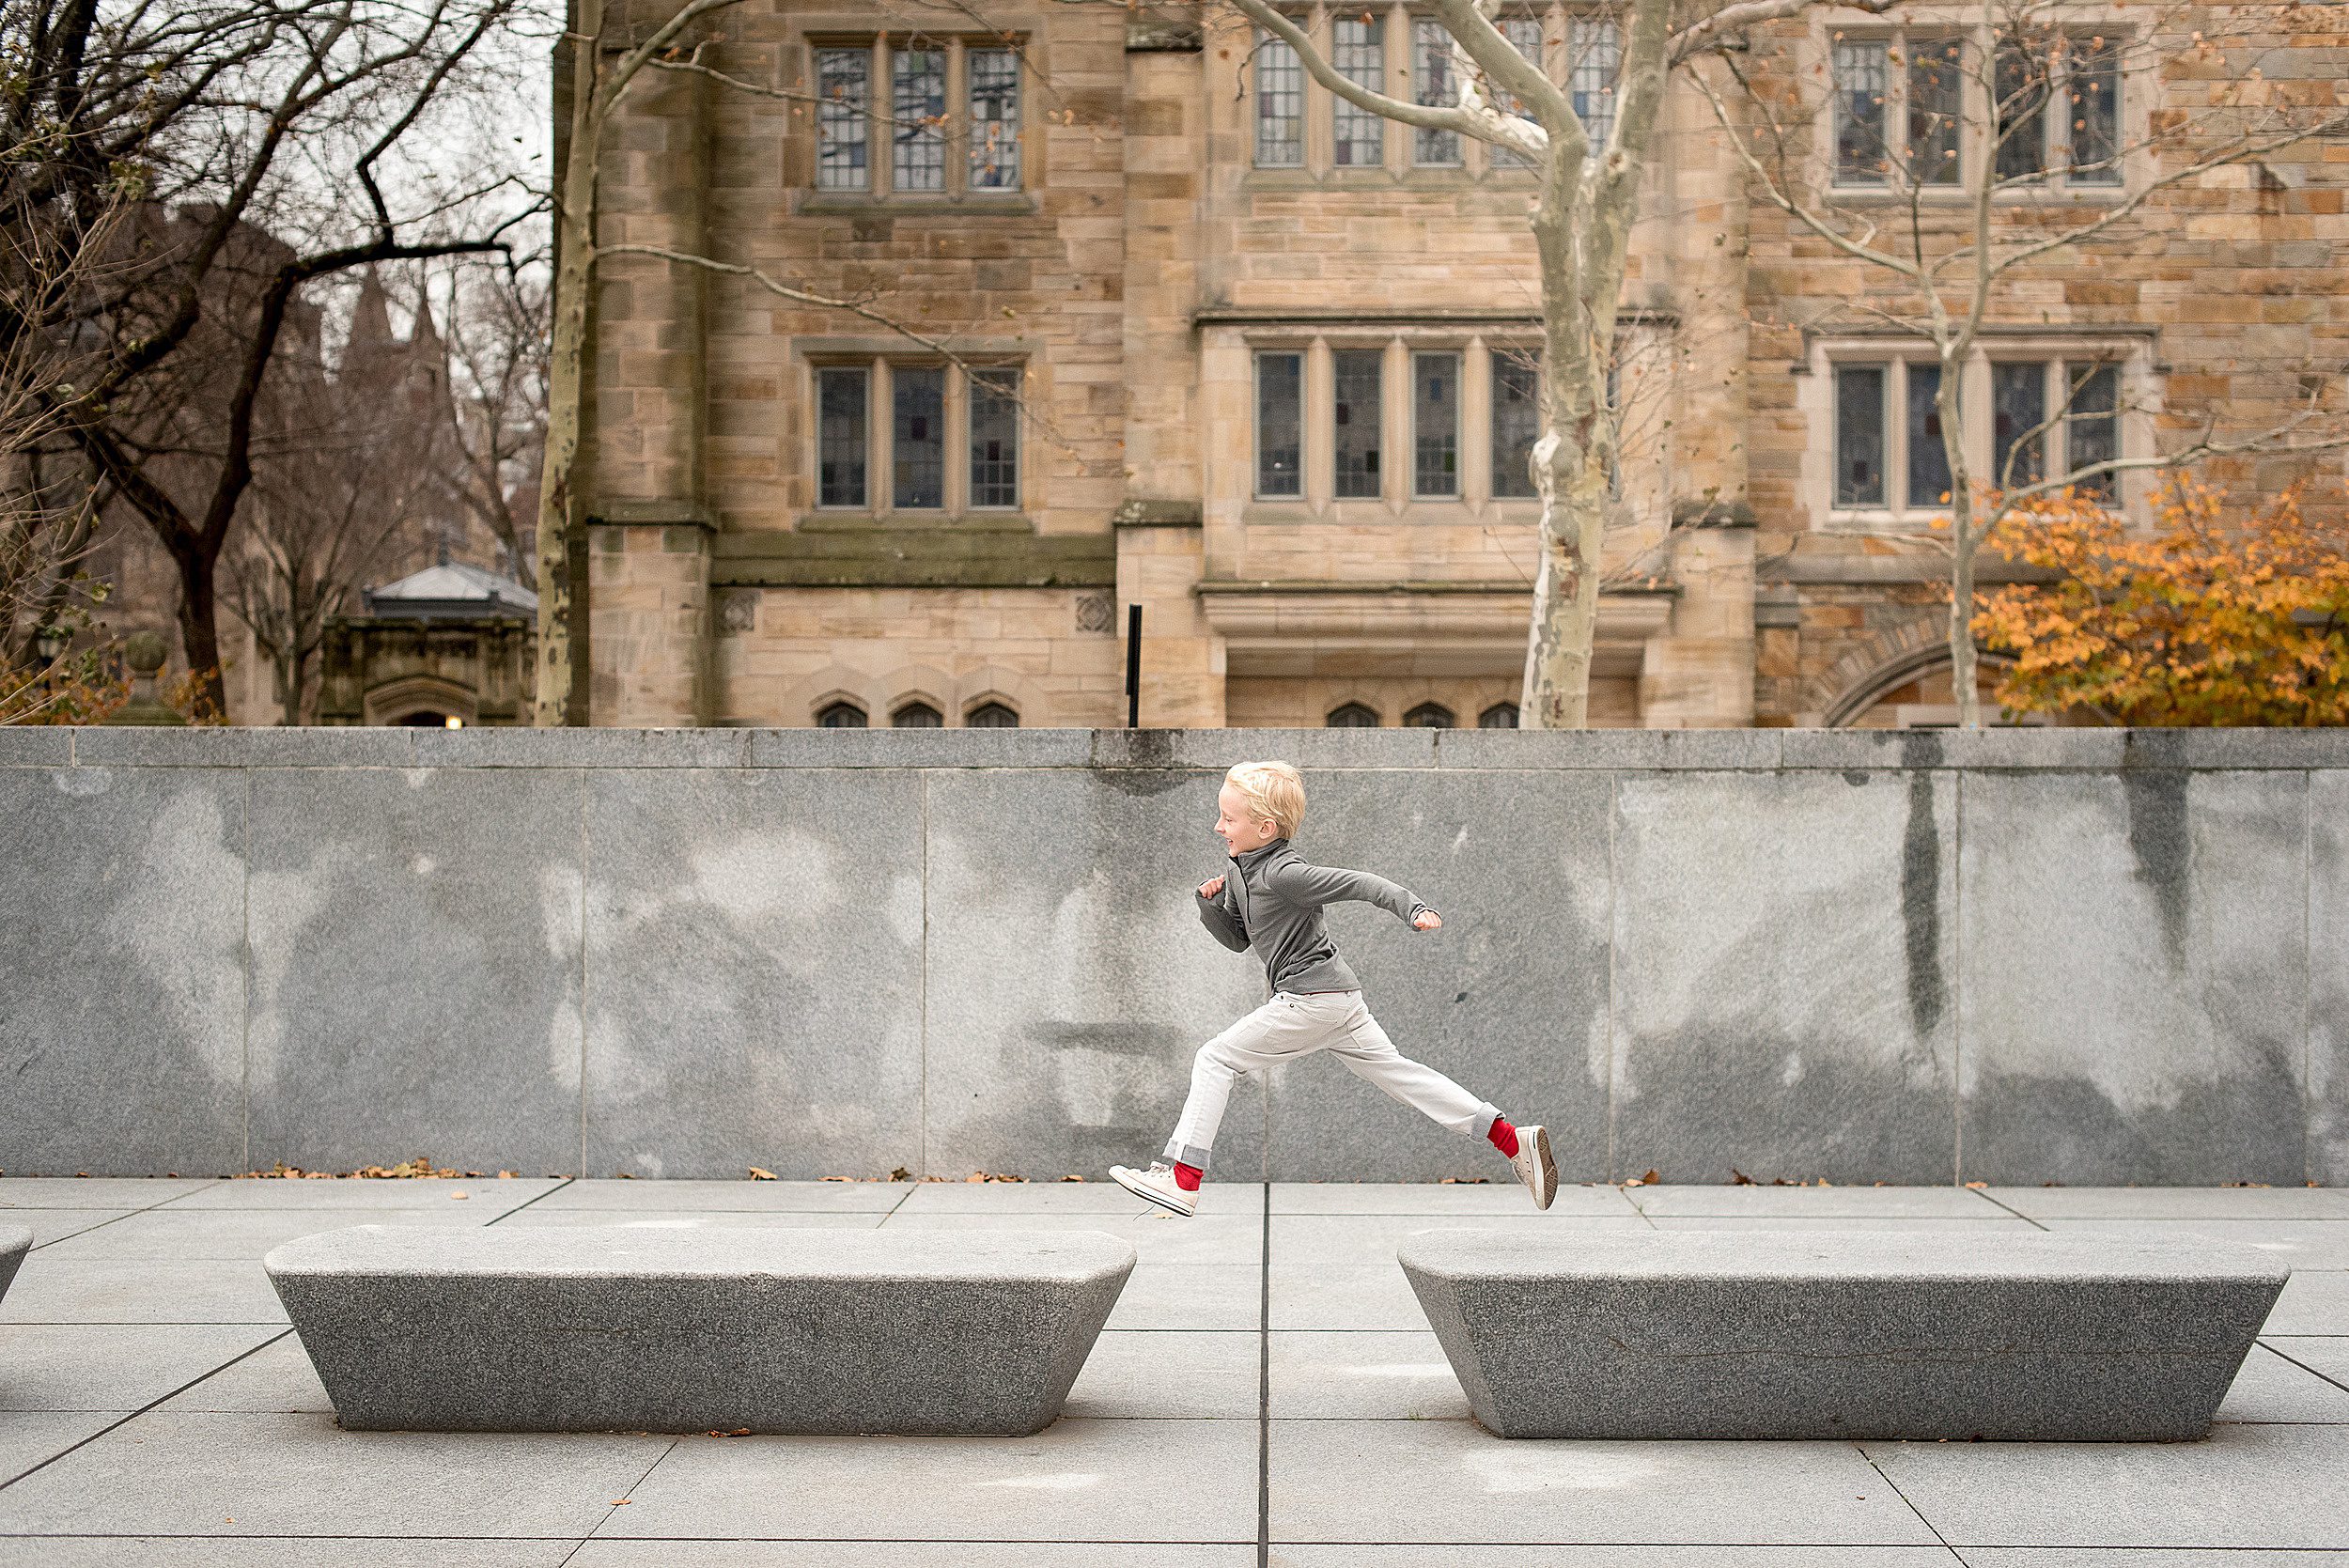 A young boy in white pants and a grey sweat jumps across marble benches in a park new haven photographer